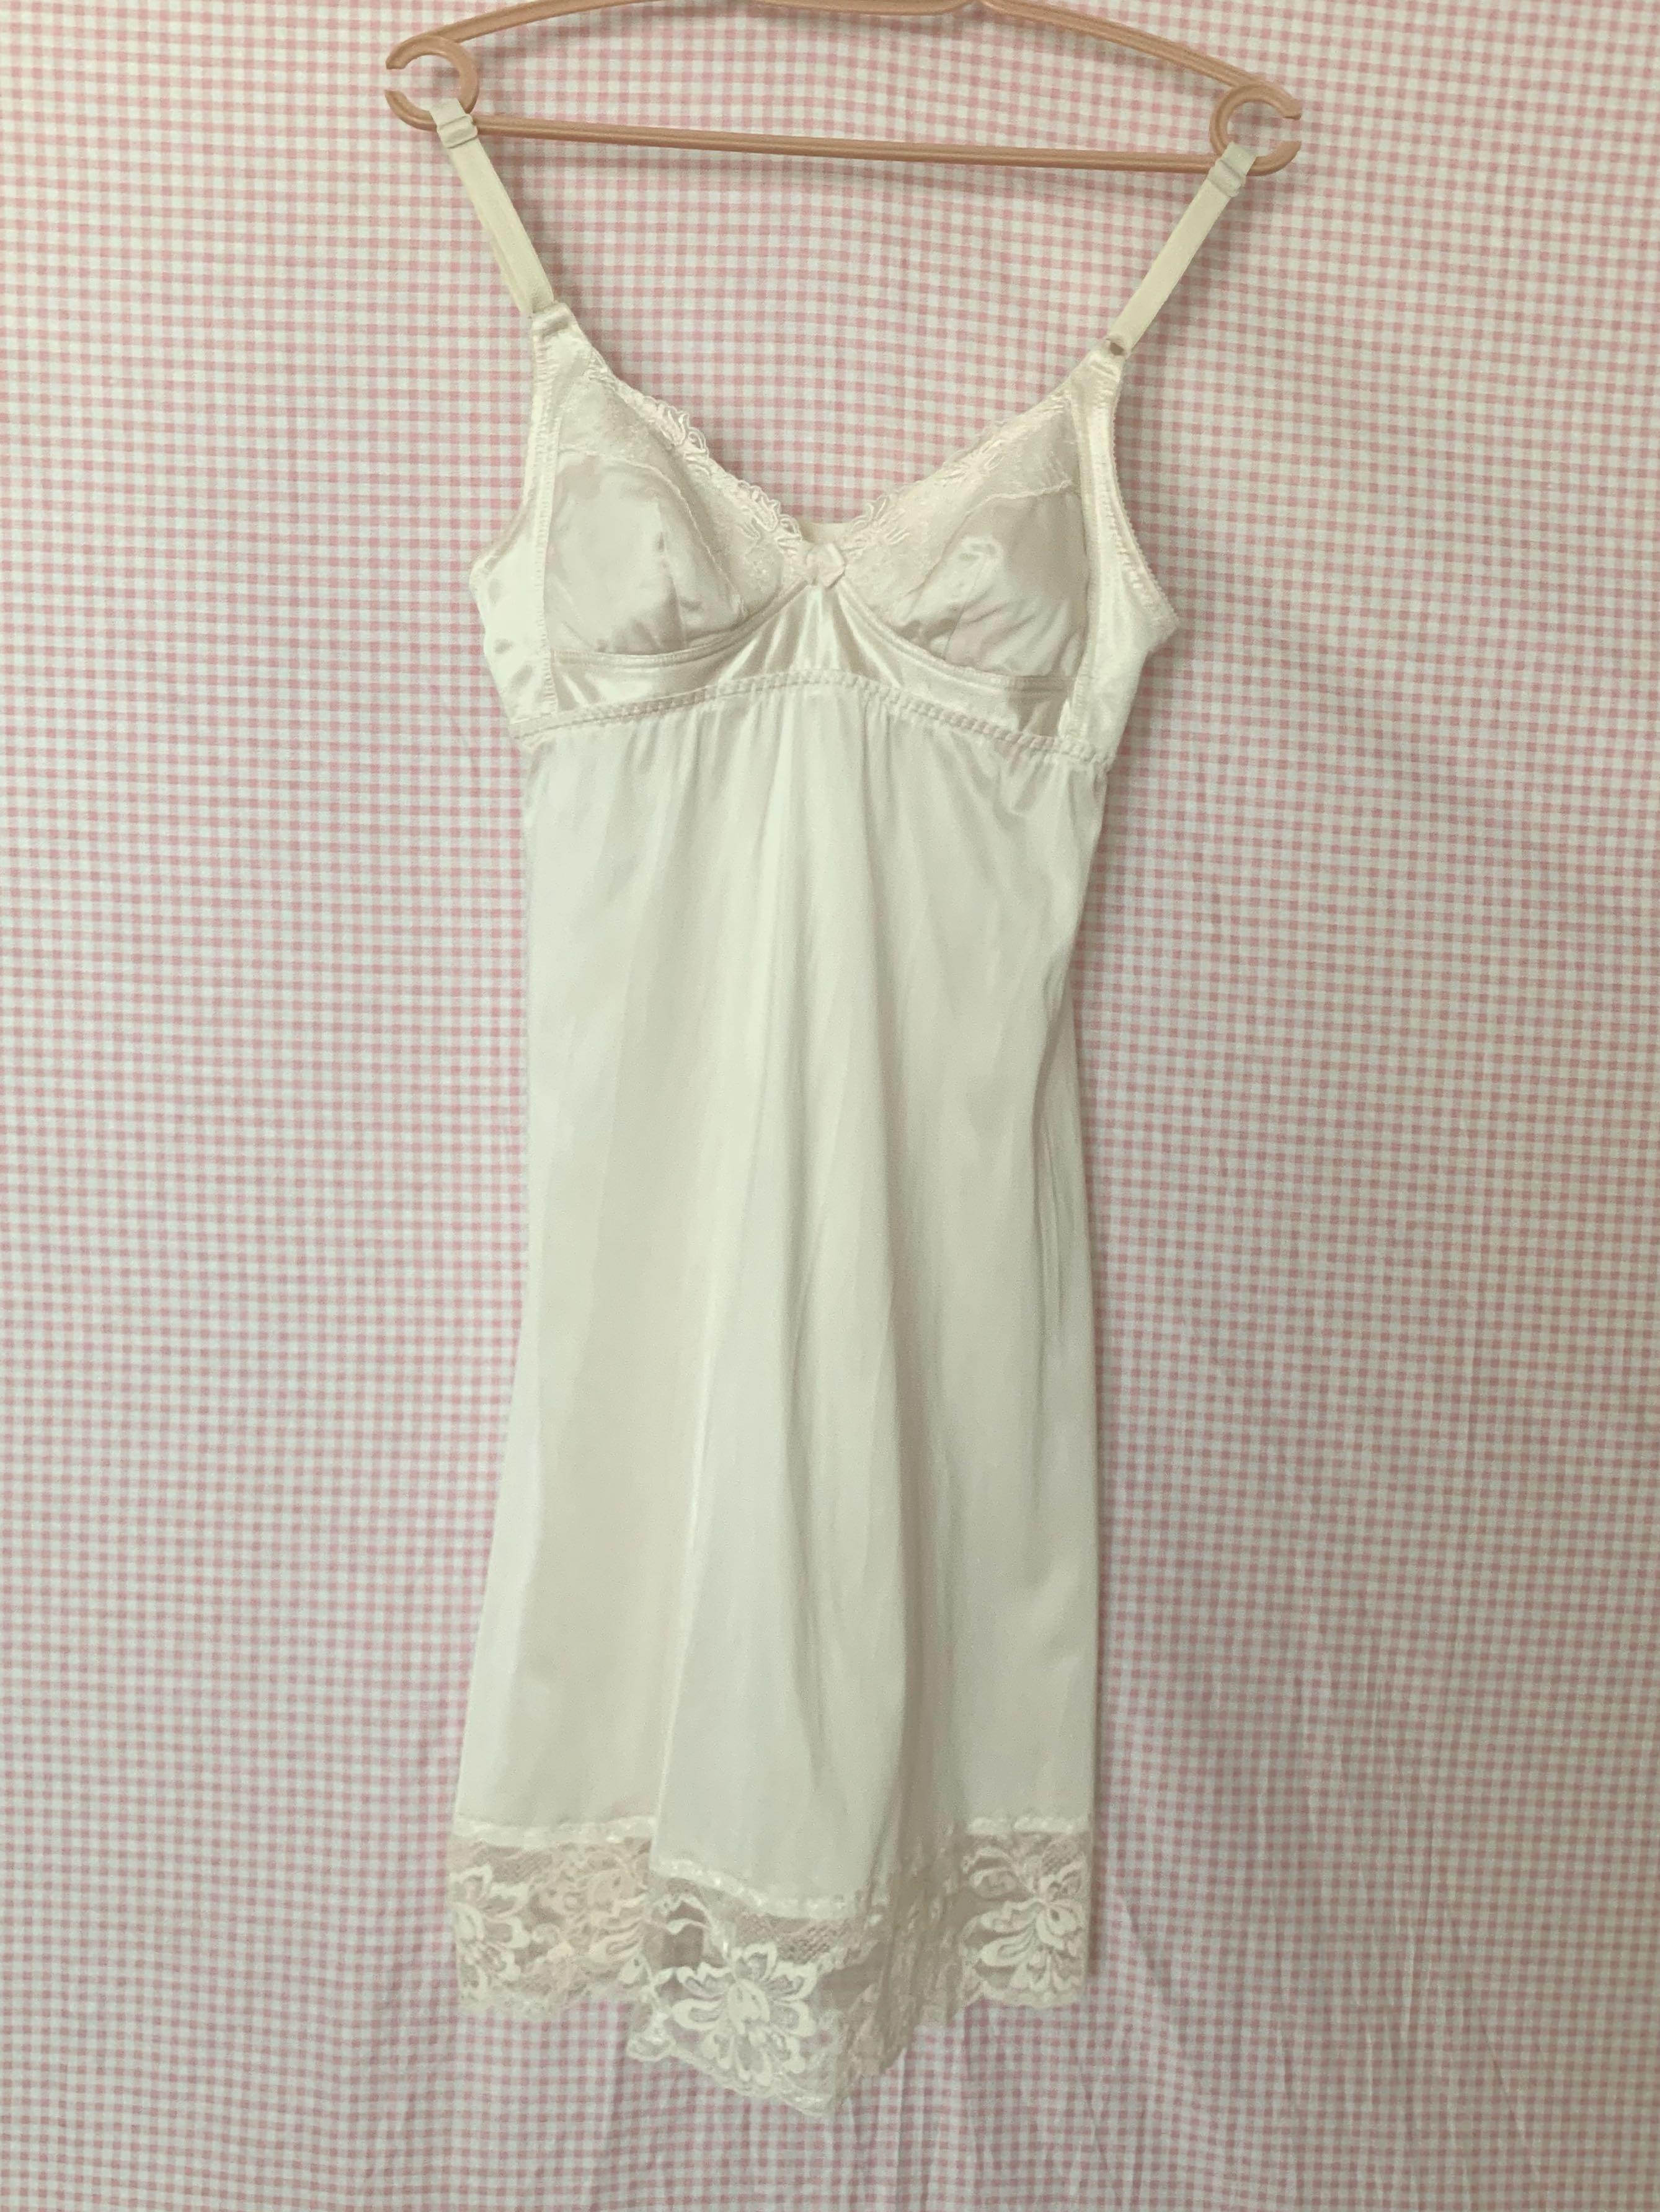 Vintage 1960s Pale Pink Nylon Mini Full Slip Dress Chemise Or Shortie Night  Gown Small